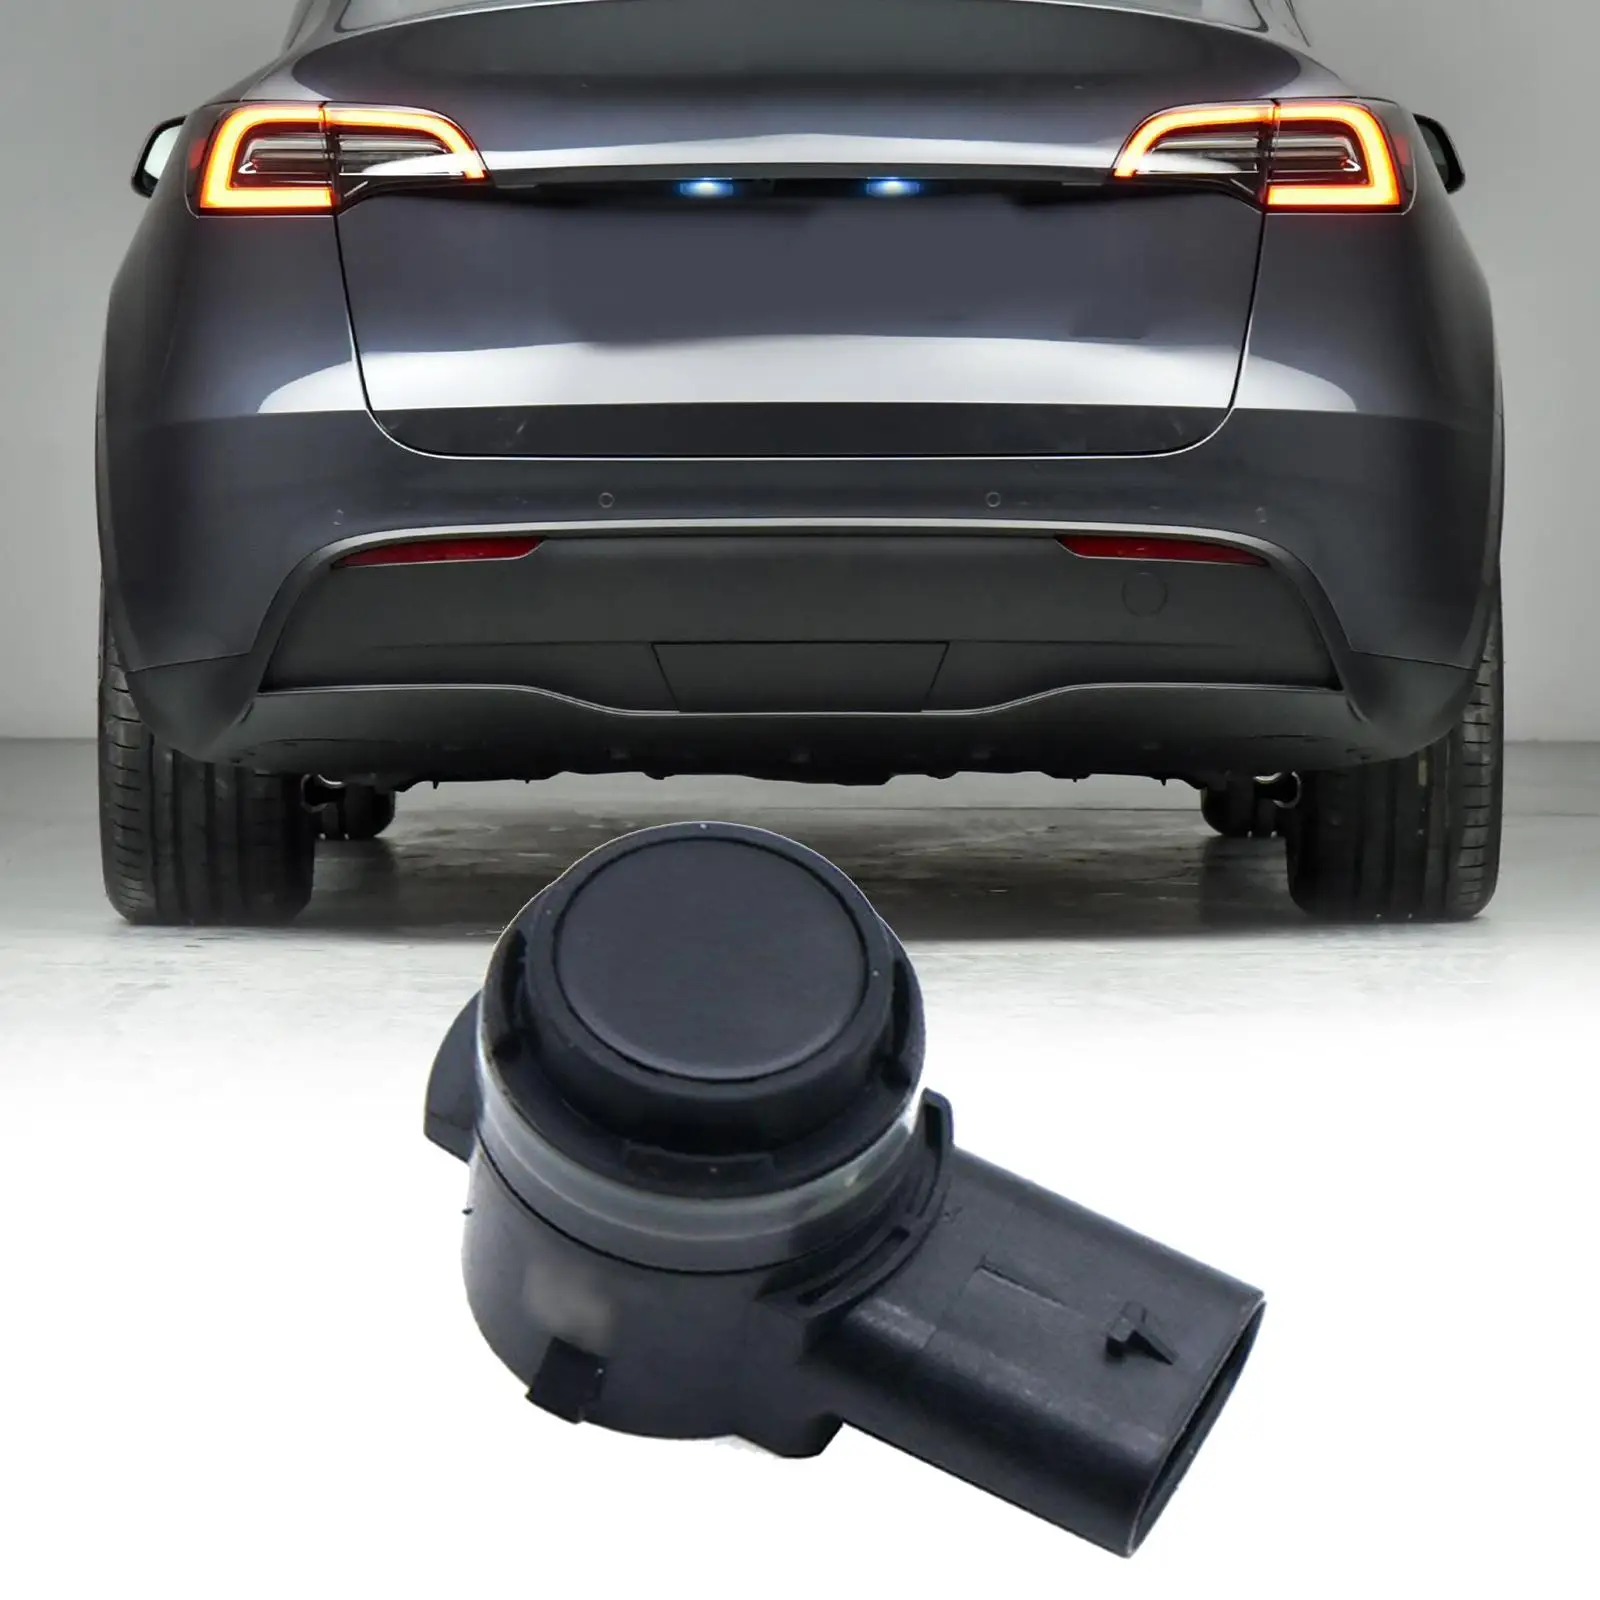 Reverse Backup Parking Sensor 1127503-01-c Replacements for Tesla Model x S 3 2017-2019 Durable Easily Install Professional